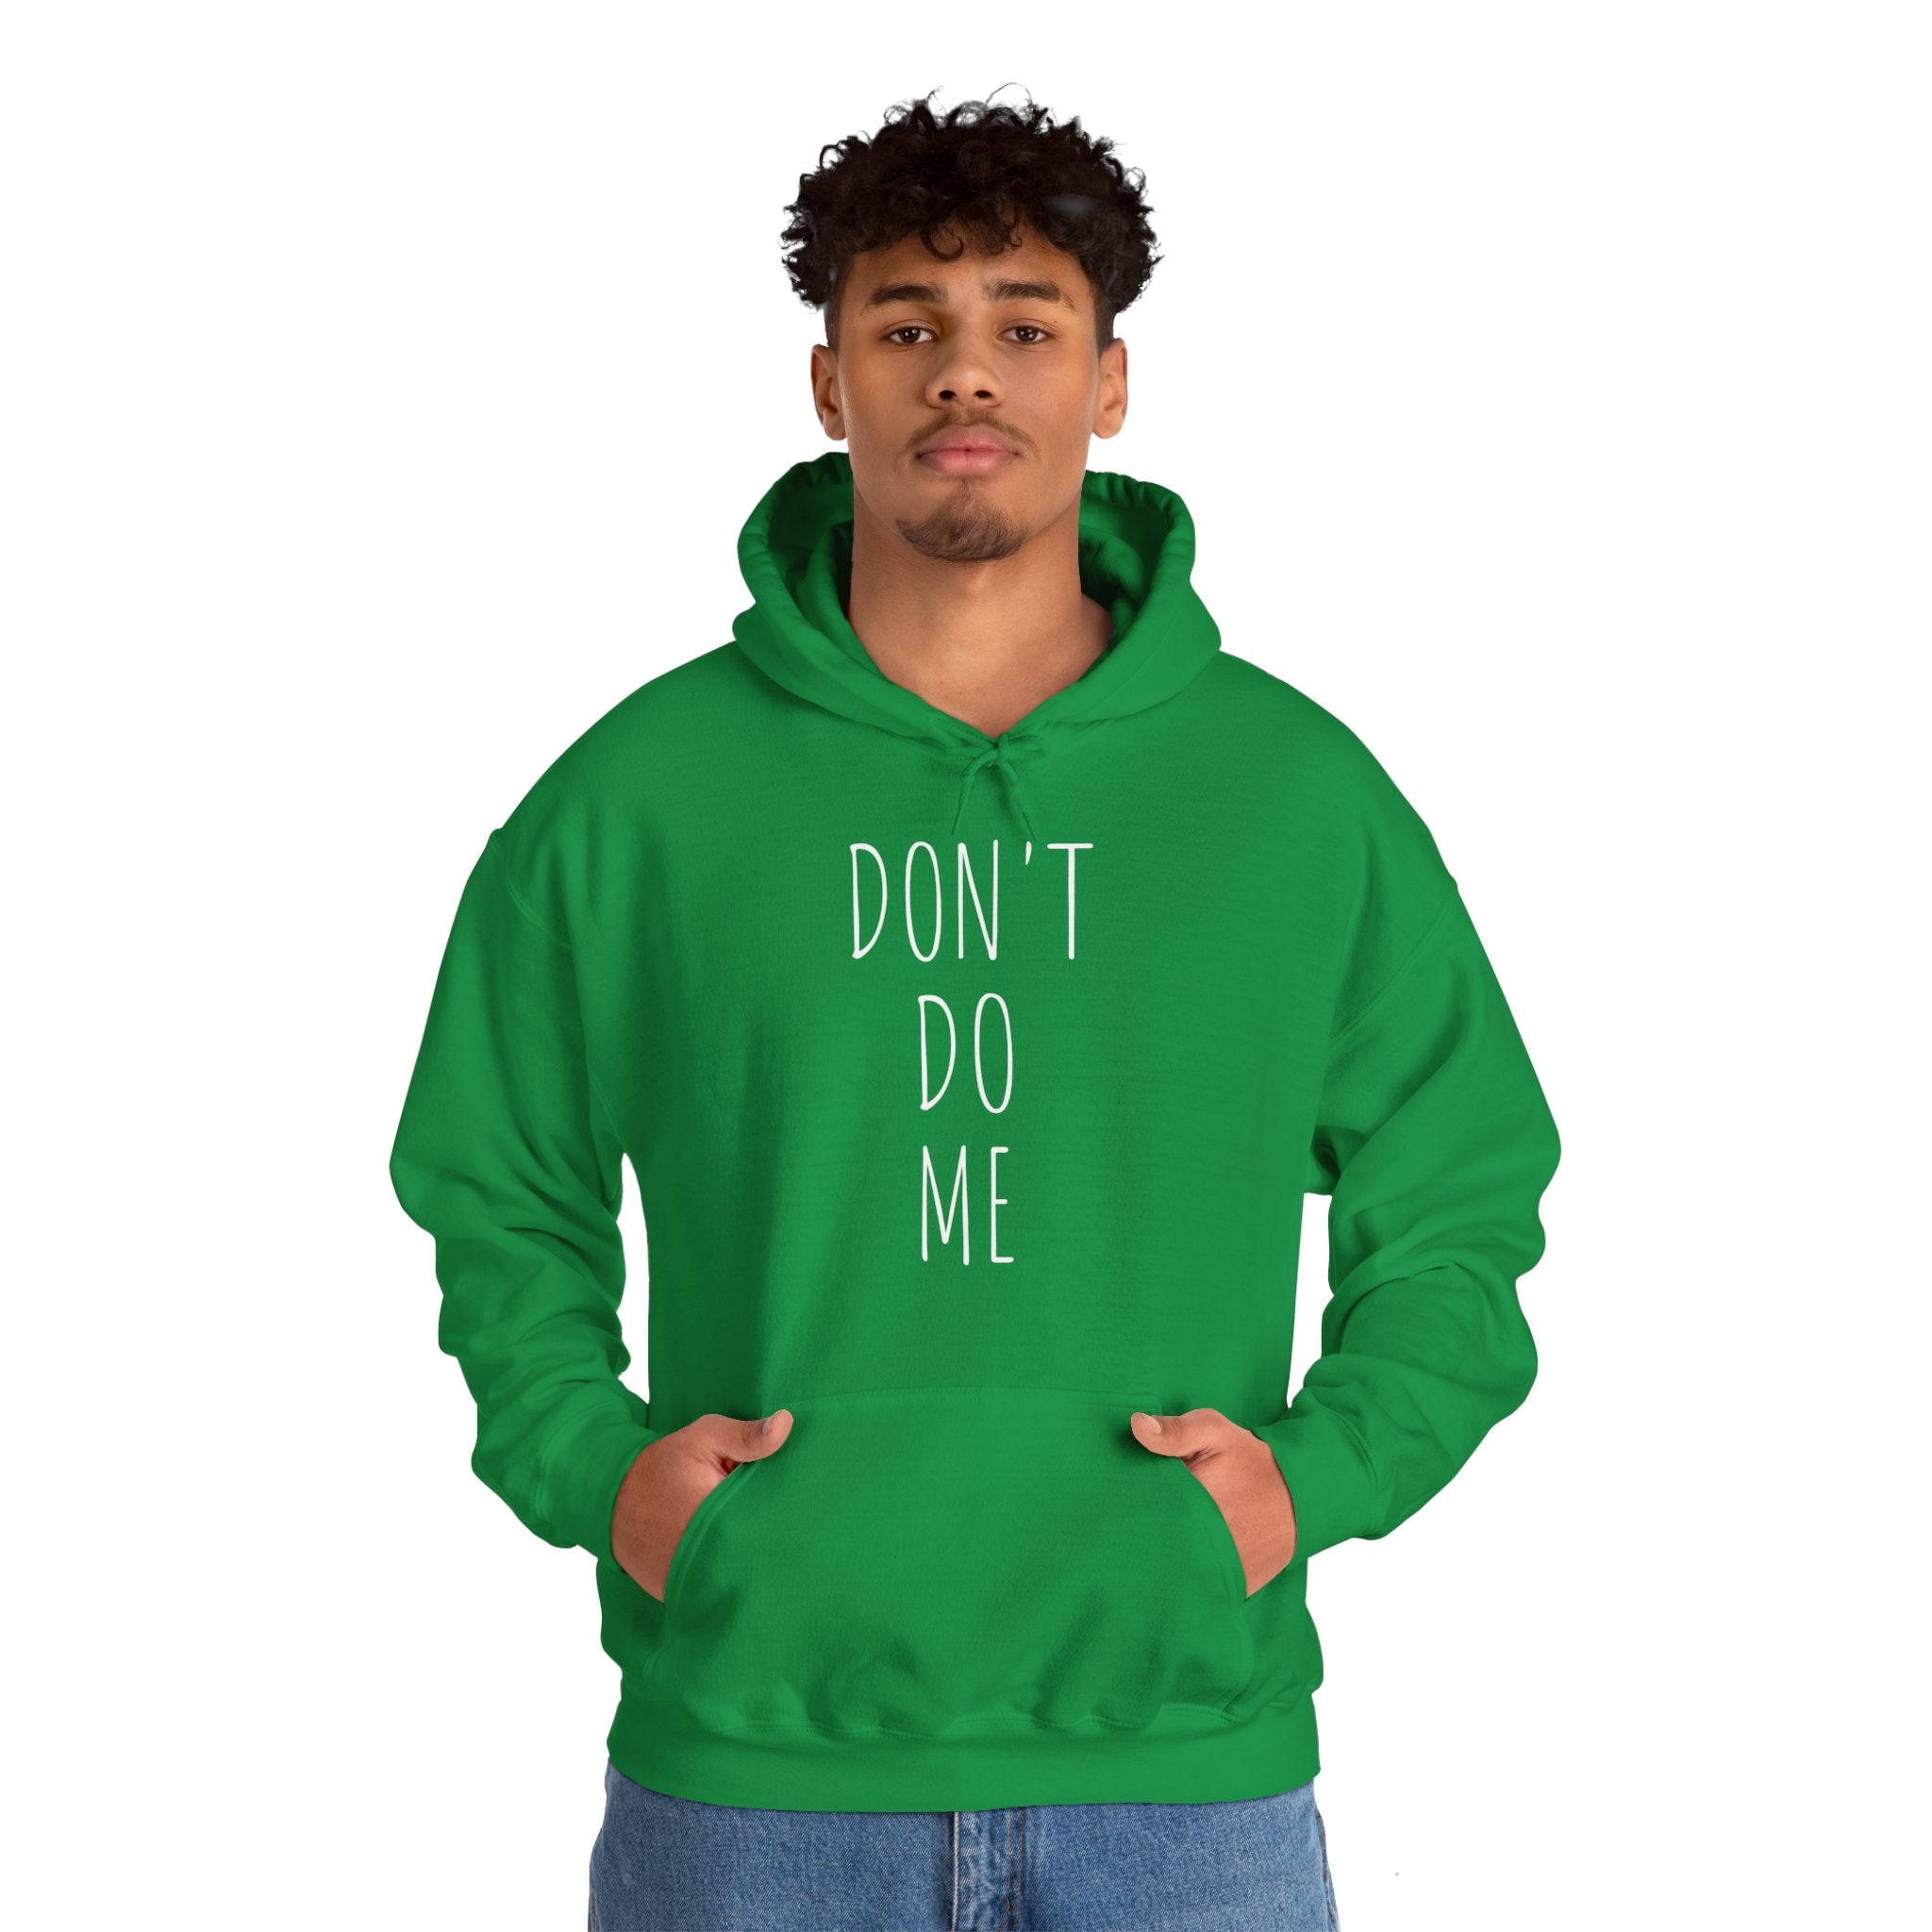 Chatty's Don't do me  Hooded Sweatshirt